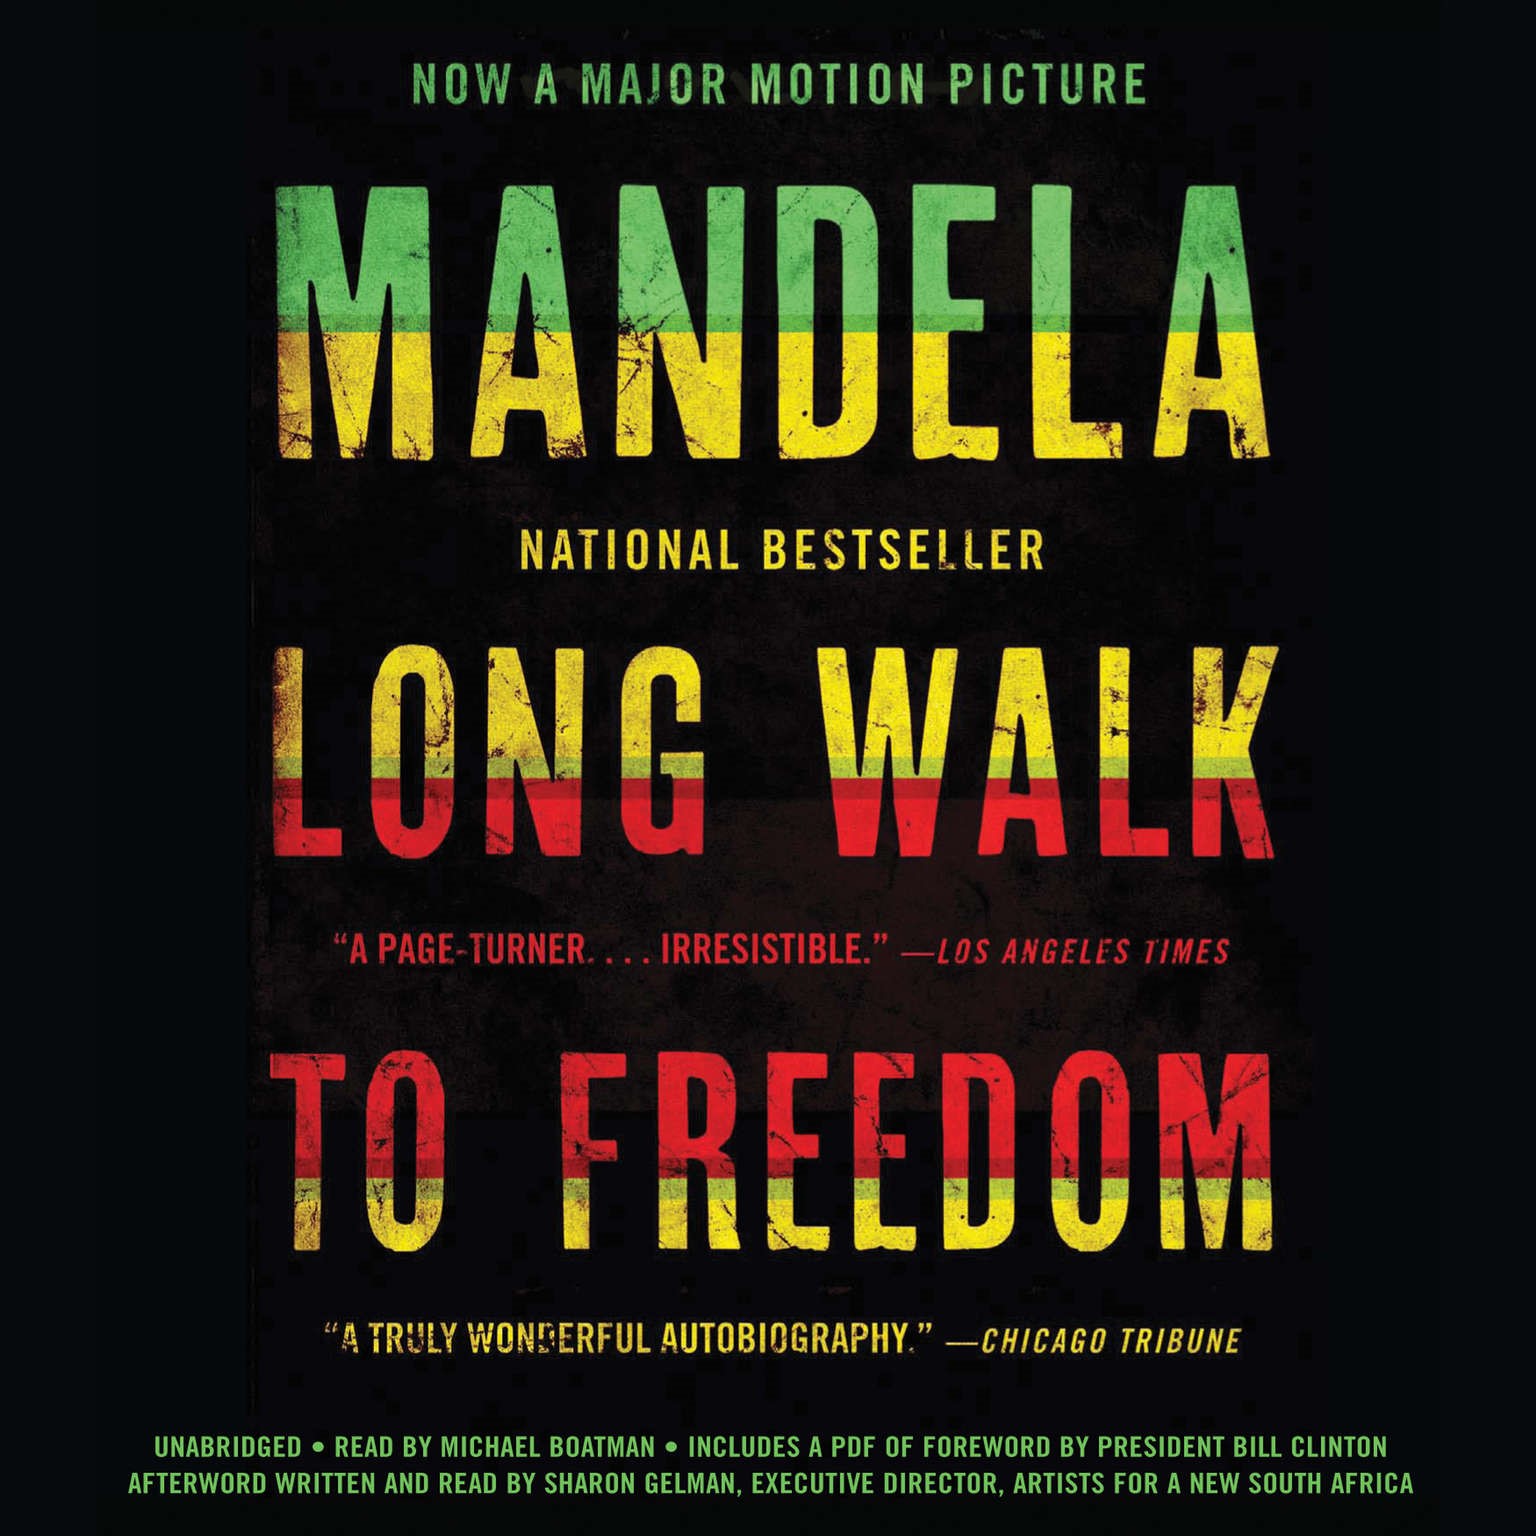 Long-Walk-to-freedom-audio-book-cover